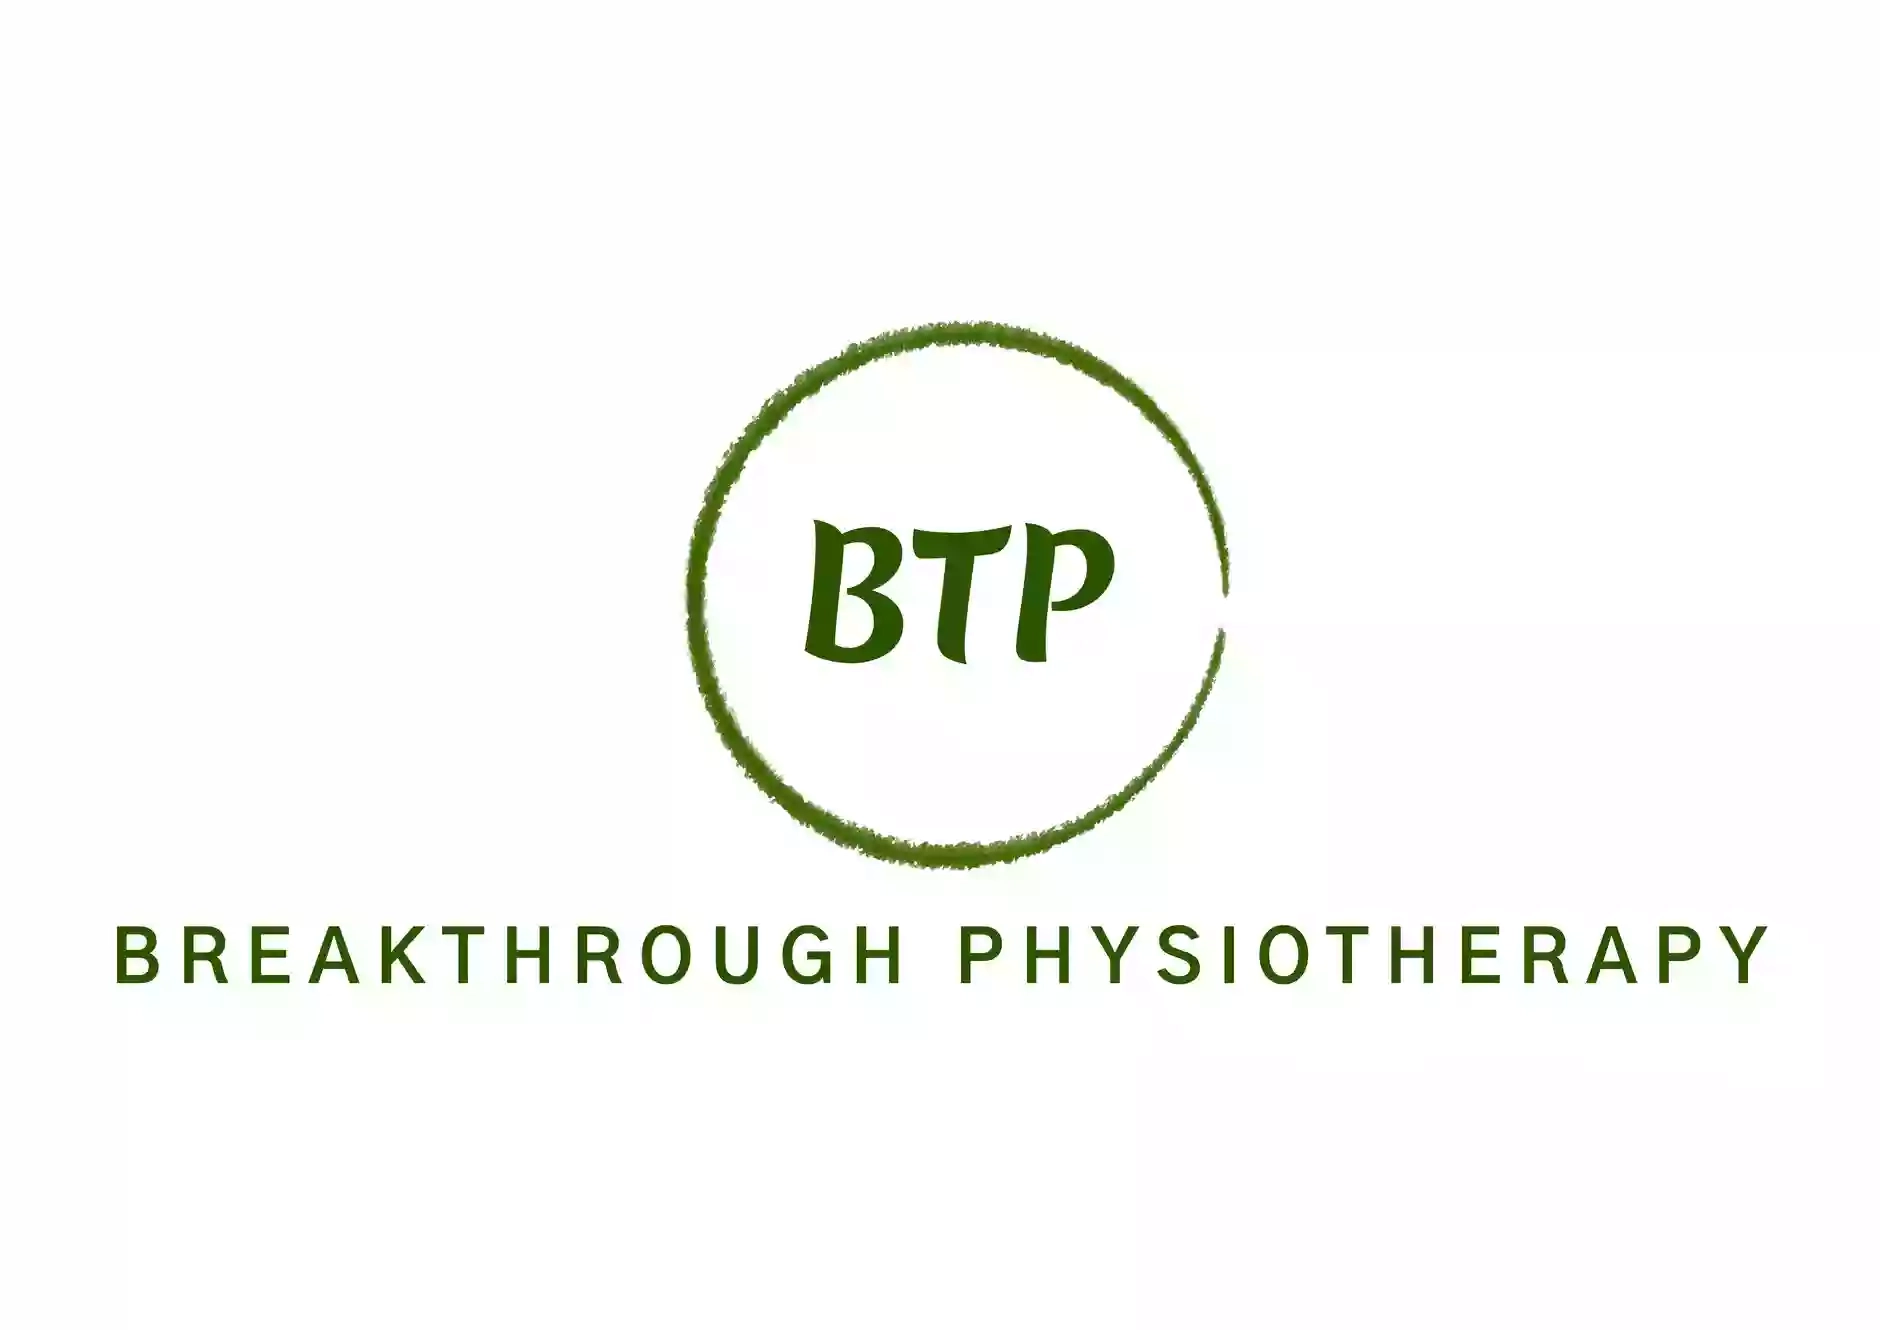 Breakthrough Physiotherapy